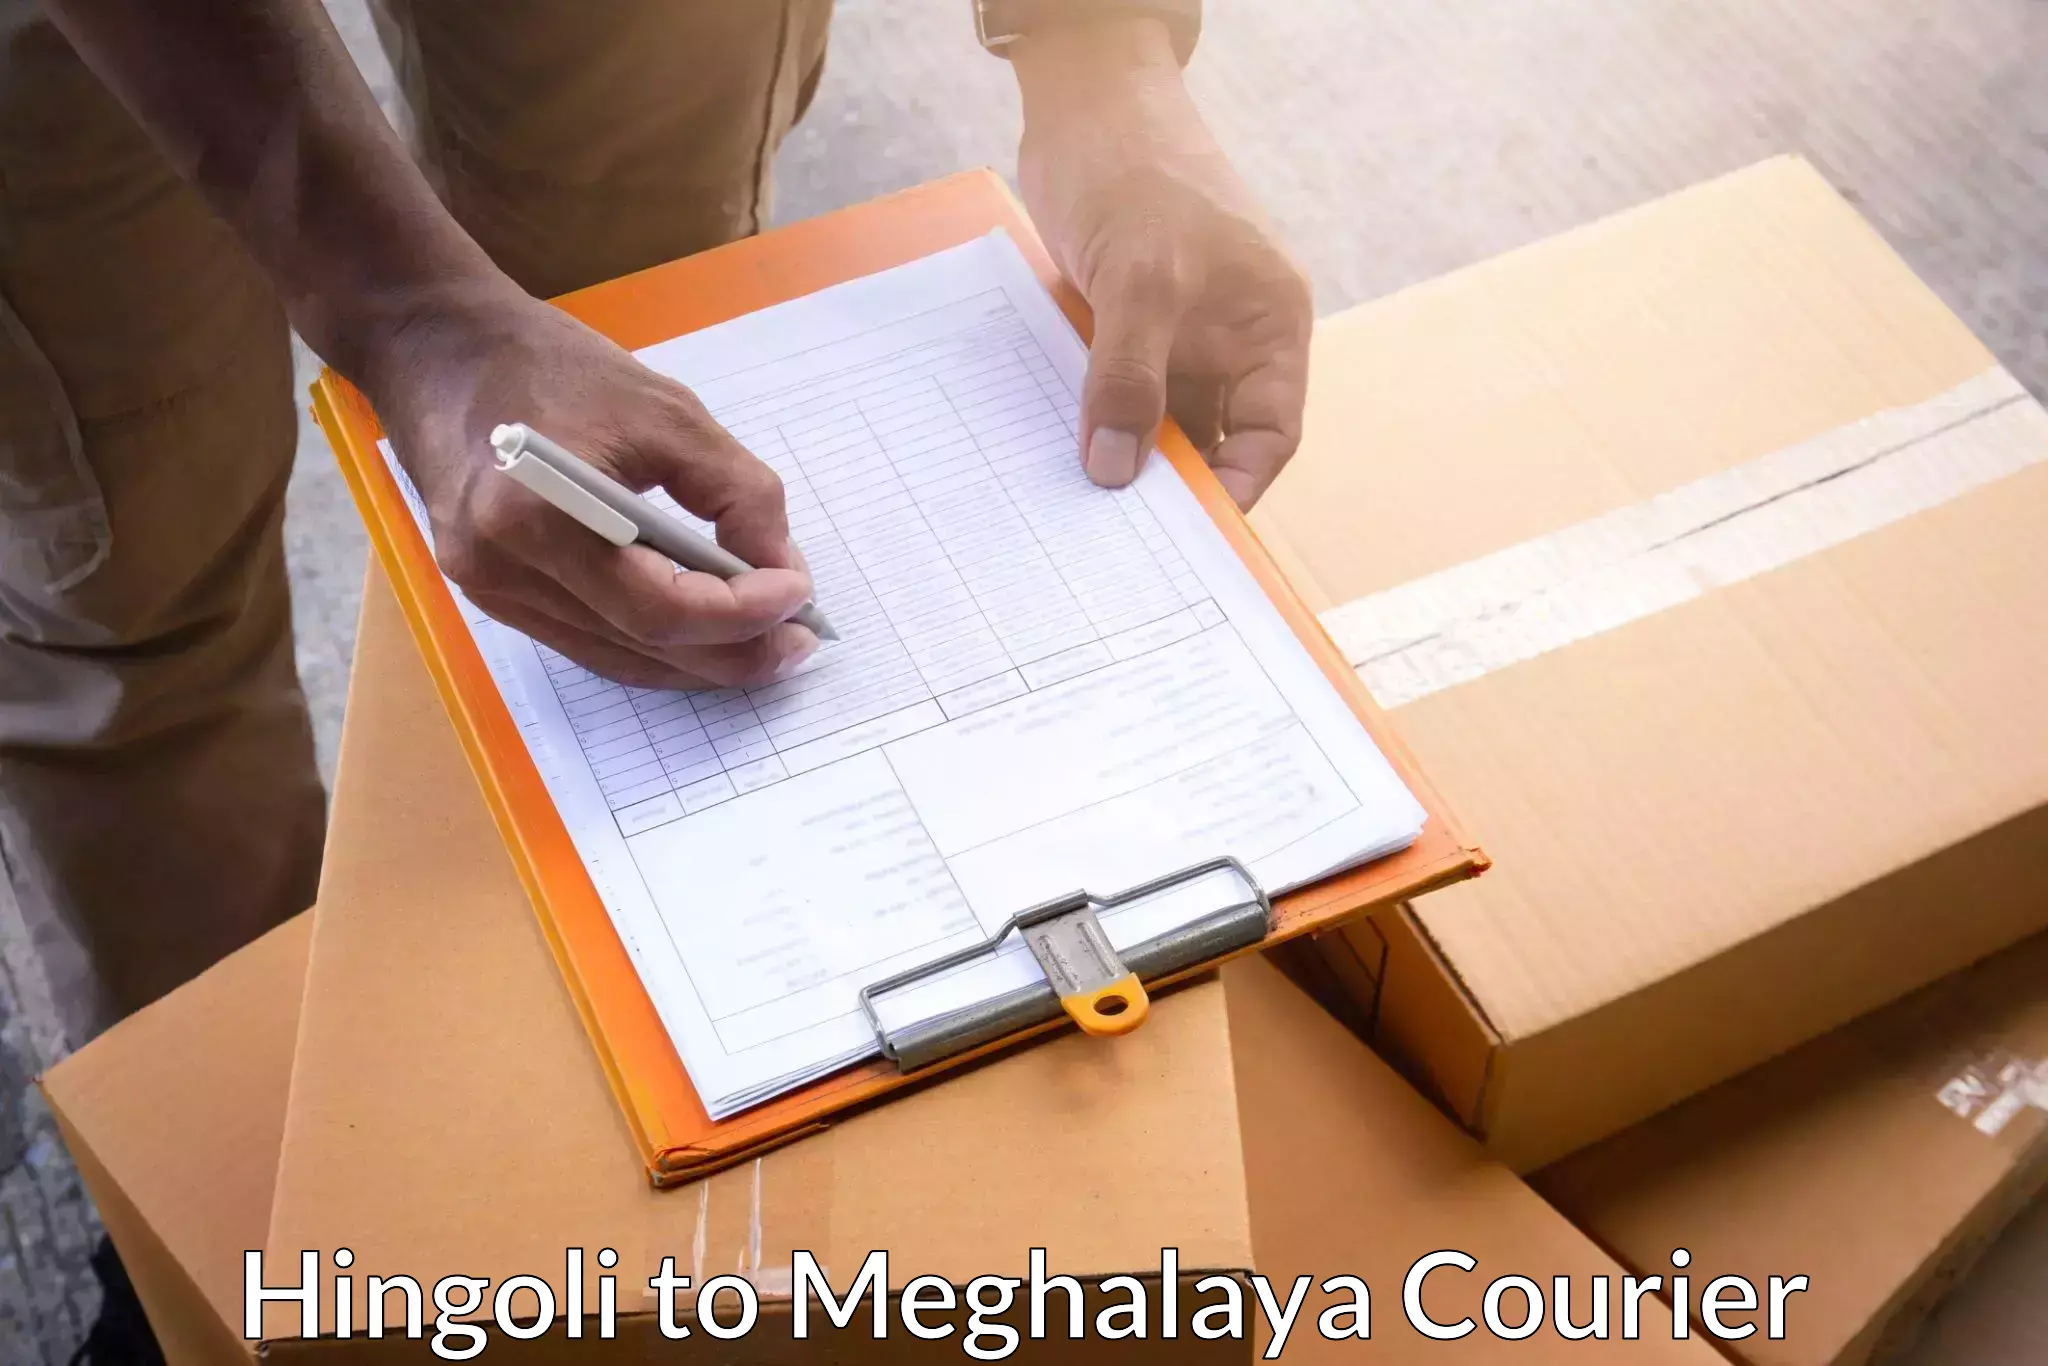 Customer-focused courier Hingoli to Nongstoin